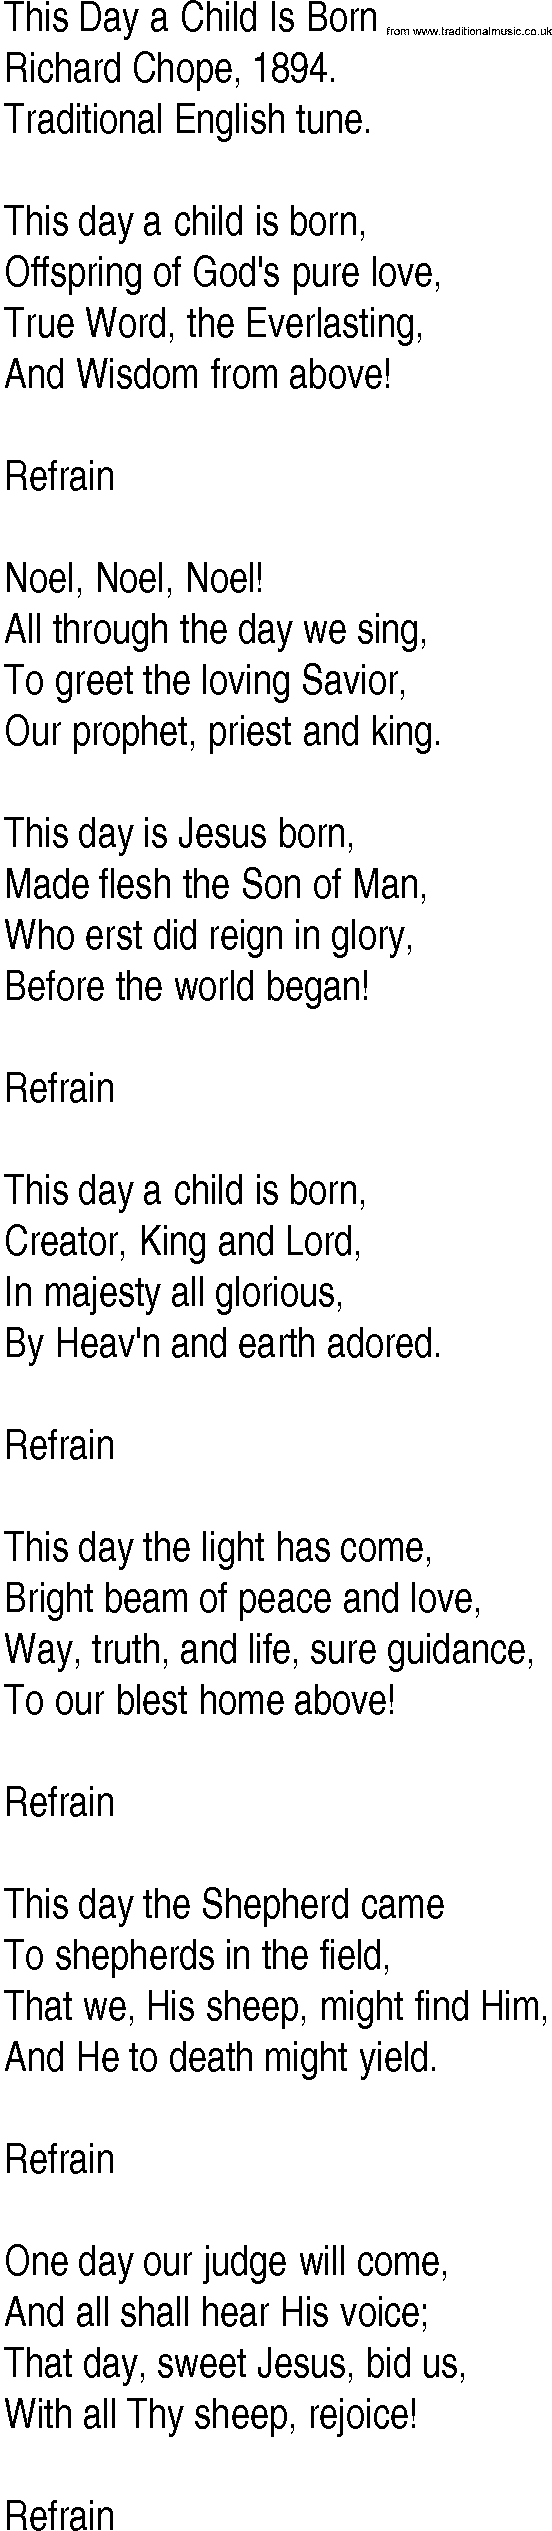 Hymn and Gospel Song: This Day a Child Is Born by Richard Chope lyrics